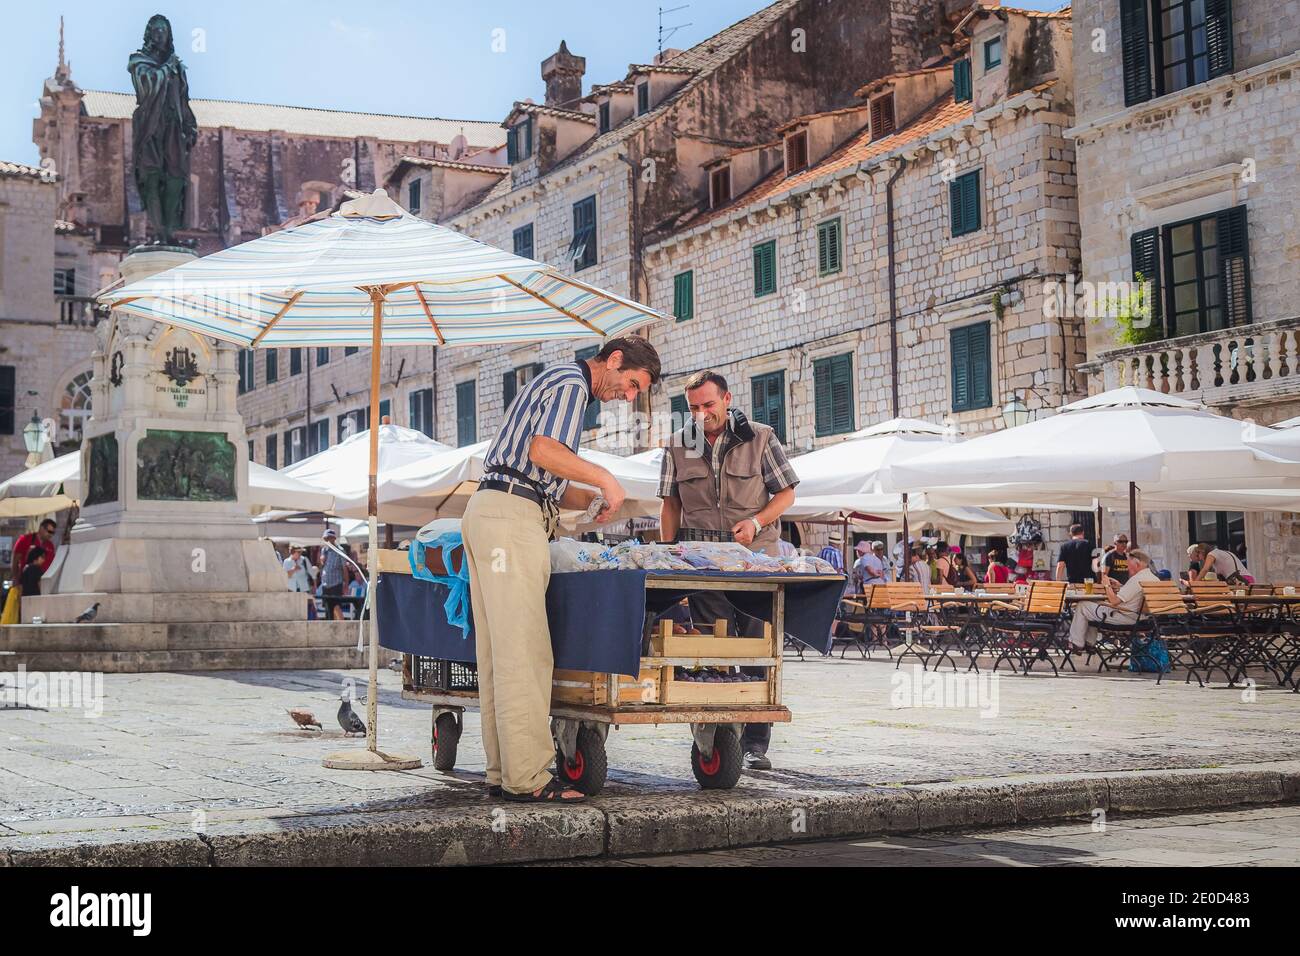 Dubrovnik, Croatia - September 26 2014: Two men share a laugh at Dubrovnik's popular open-air market at Gundulic Square in the heart of the old town. Stock Photo